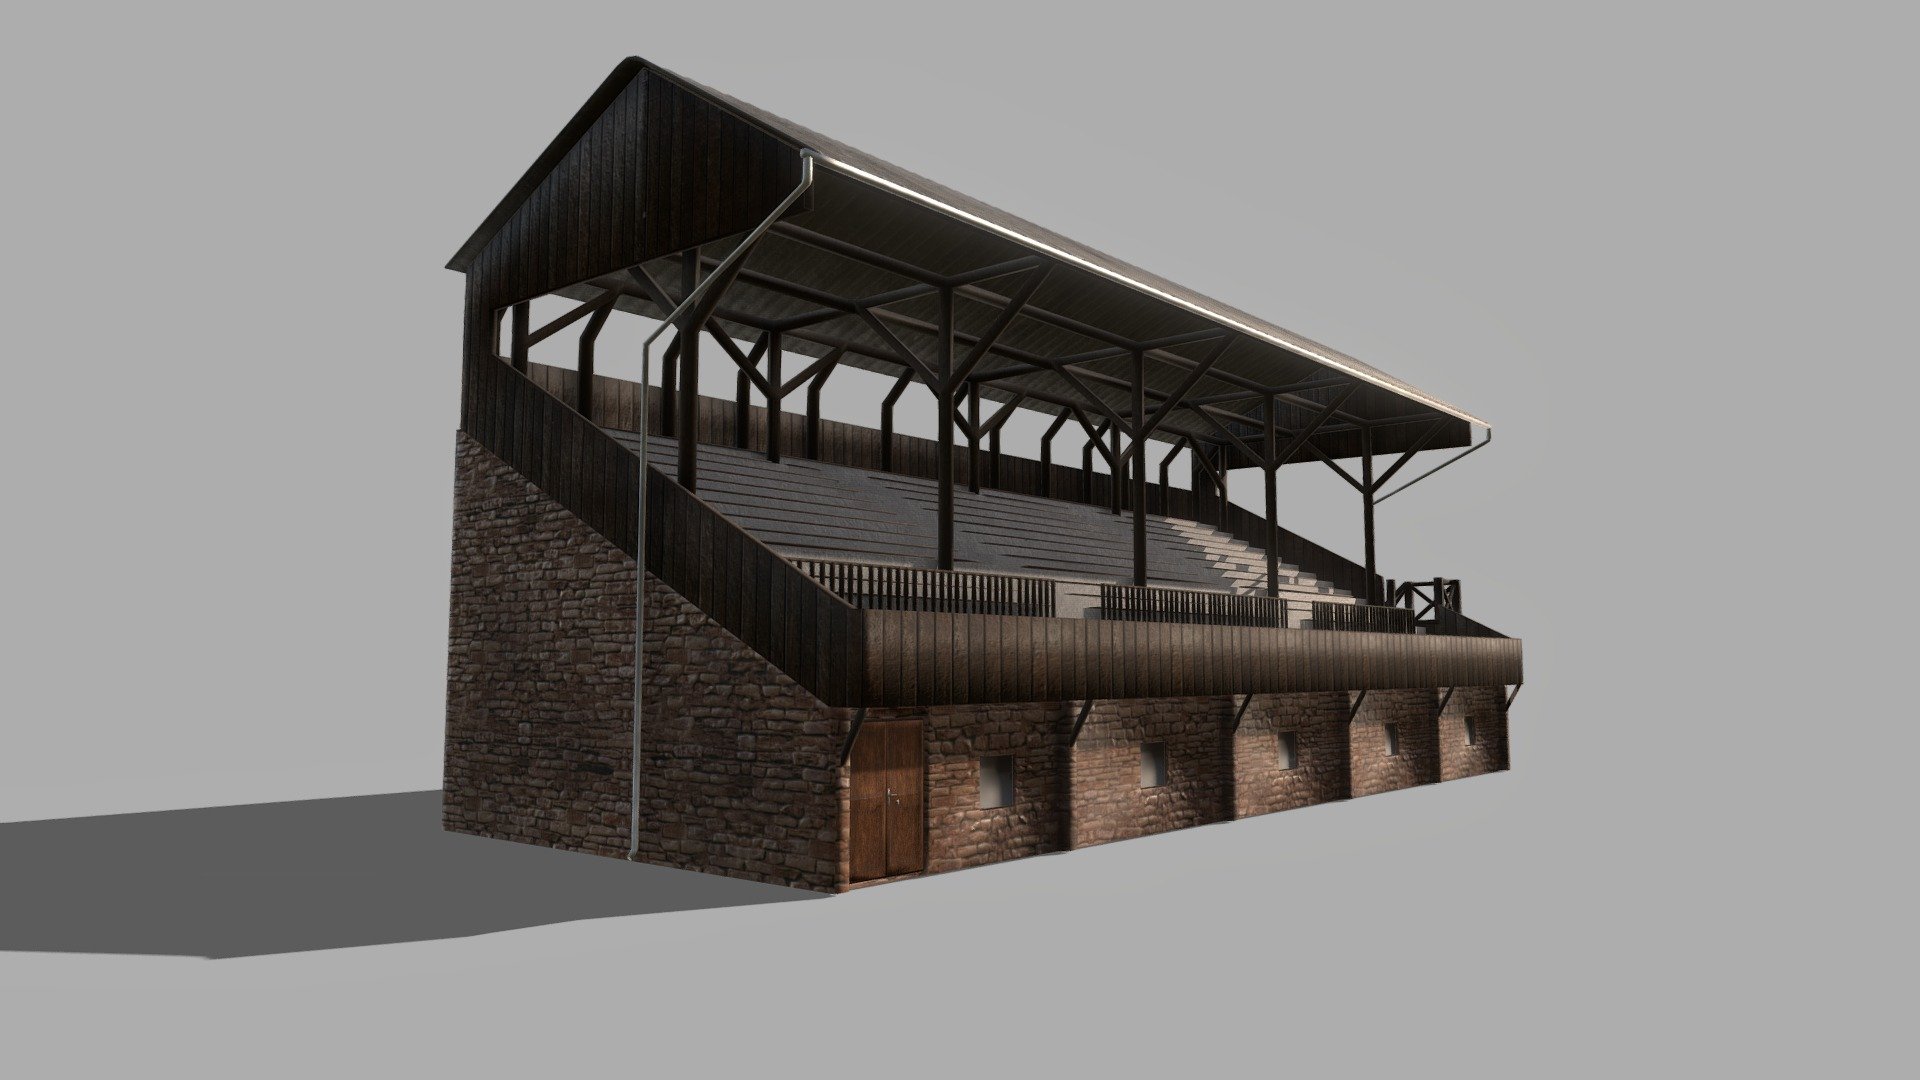 An old football stadium from my hometown.
I must optimize the textures, the size was too high. 
Some references: 


 - Old football stadium tribune - 3D model by dg samples (@dgsamples) 3d model